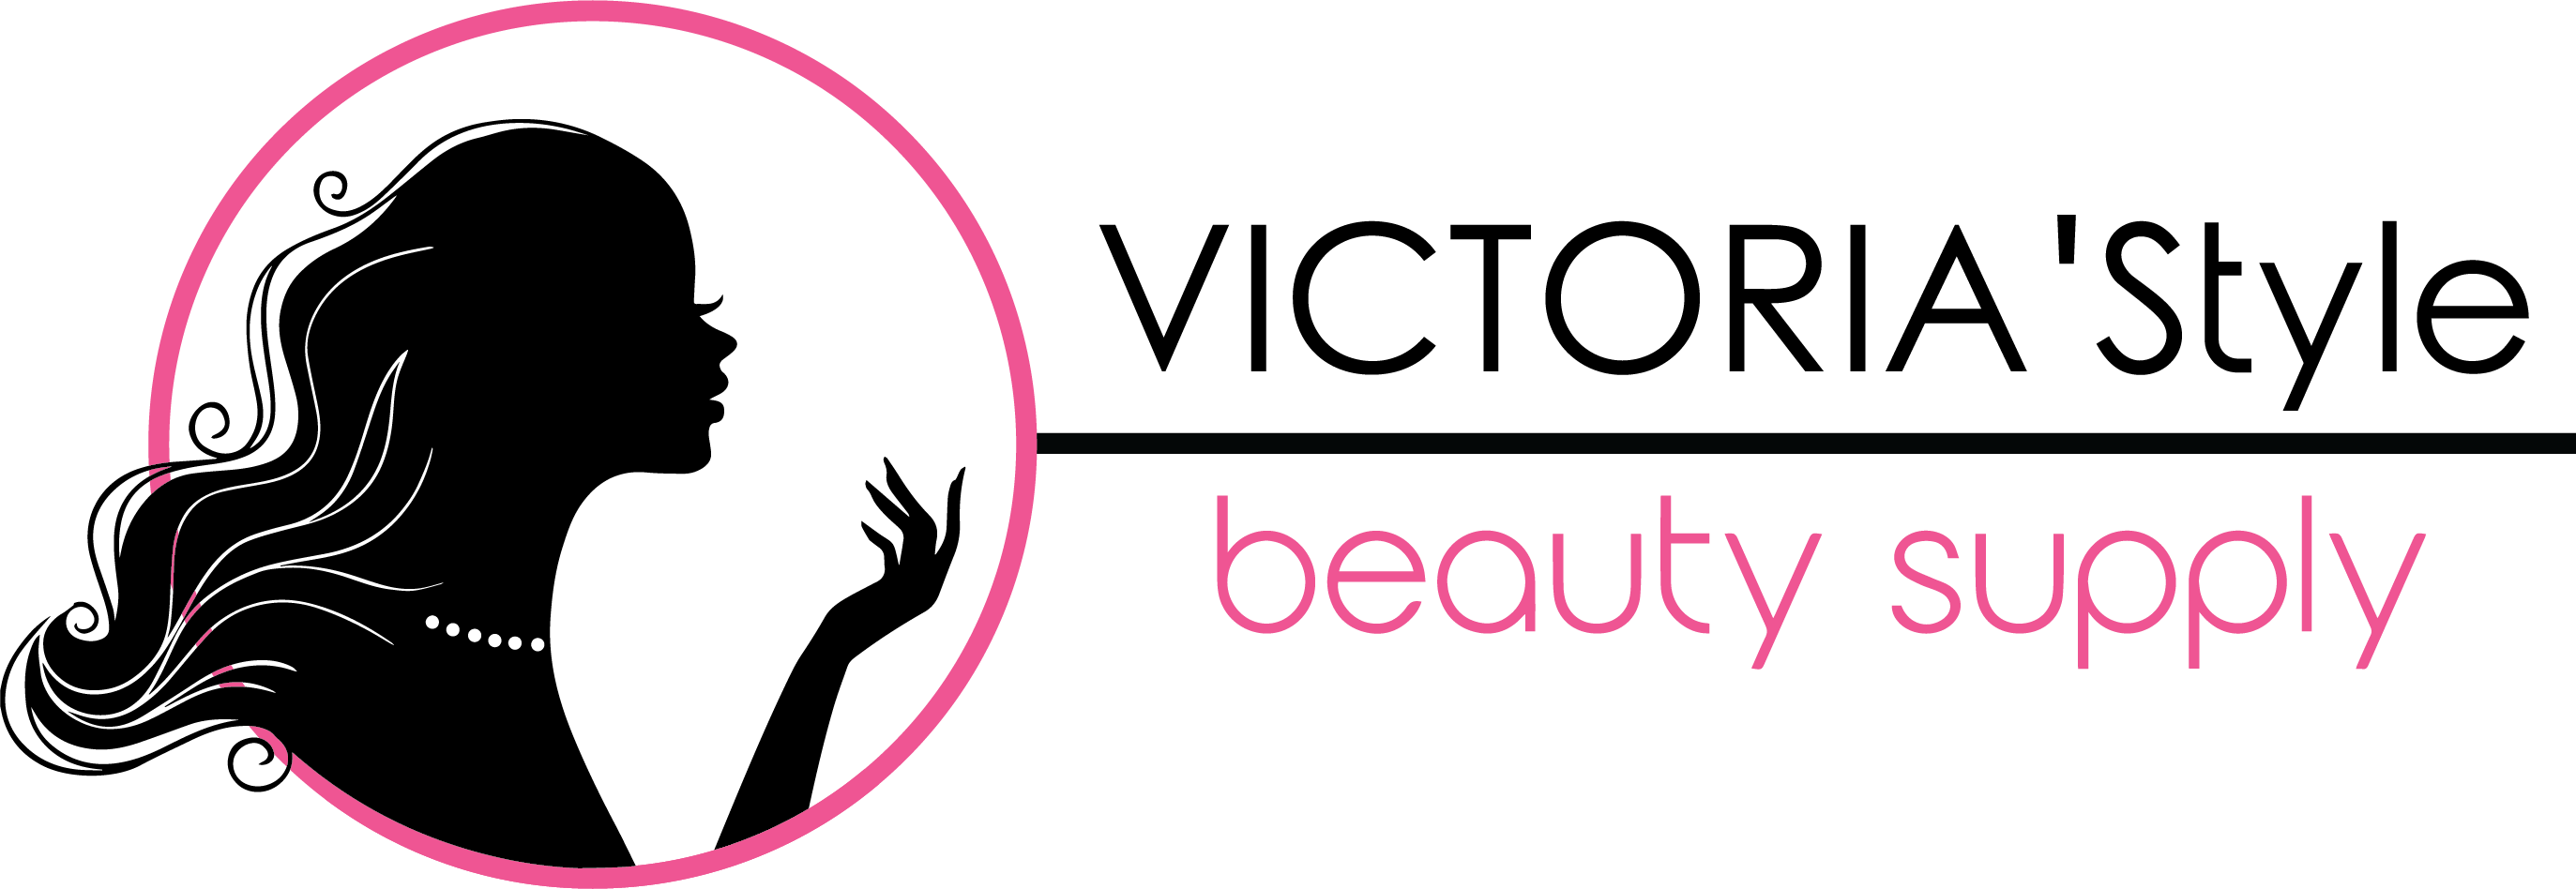 Victoria Style Beauty Supply